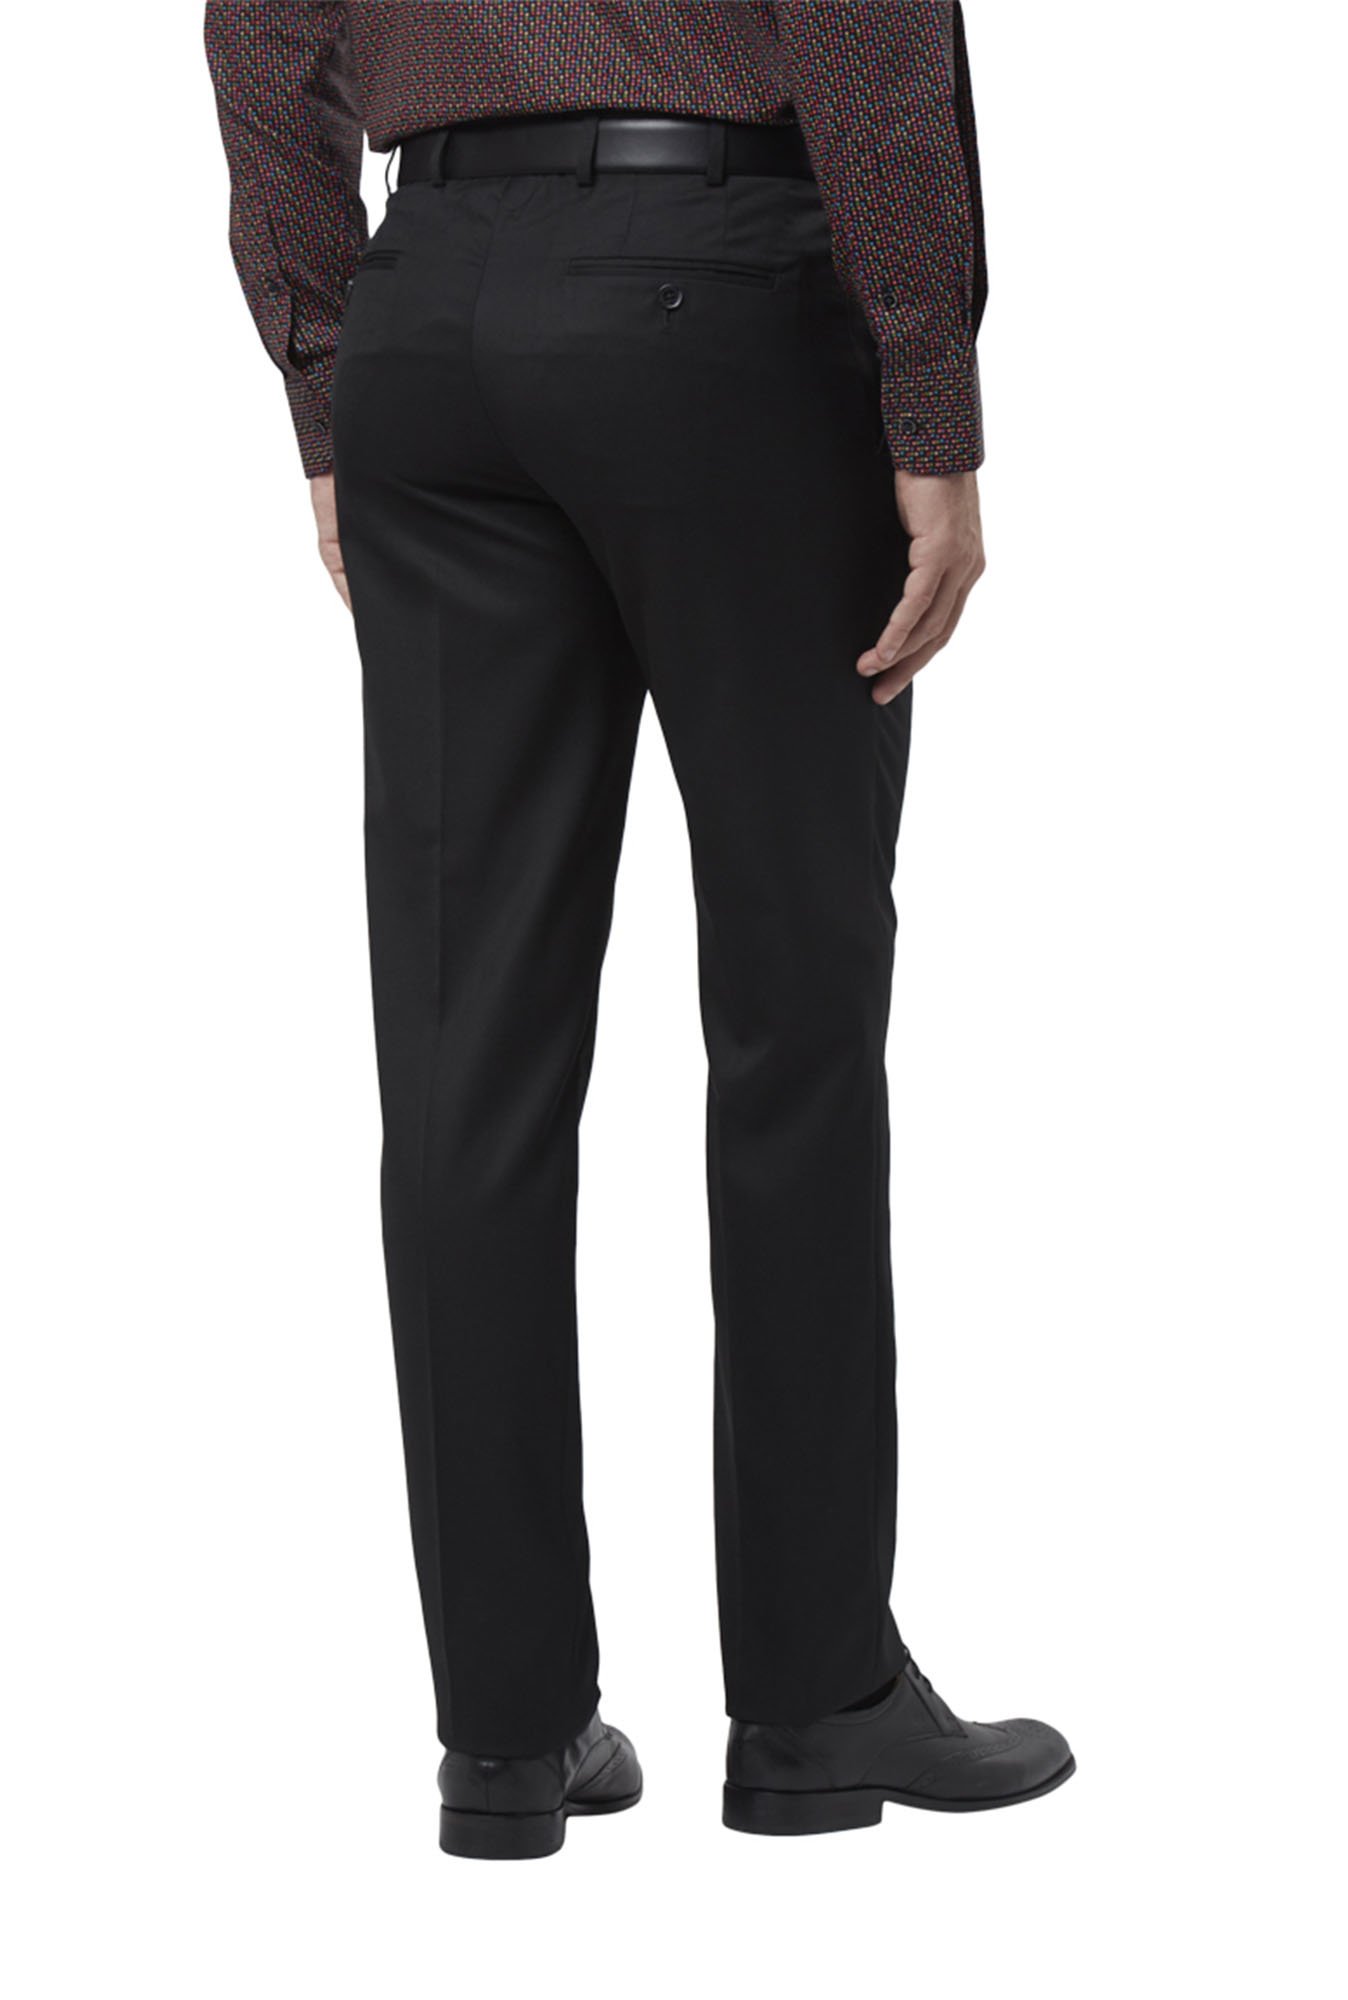 Buy Raymond Men Black Contemporary Fit Solid Formal Trousers - Trousers for  Men 1915537 | Myntra